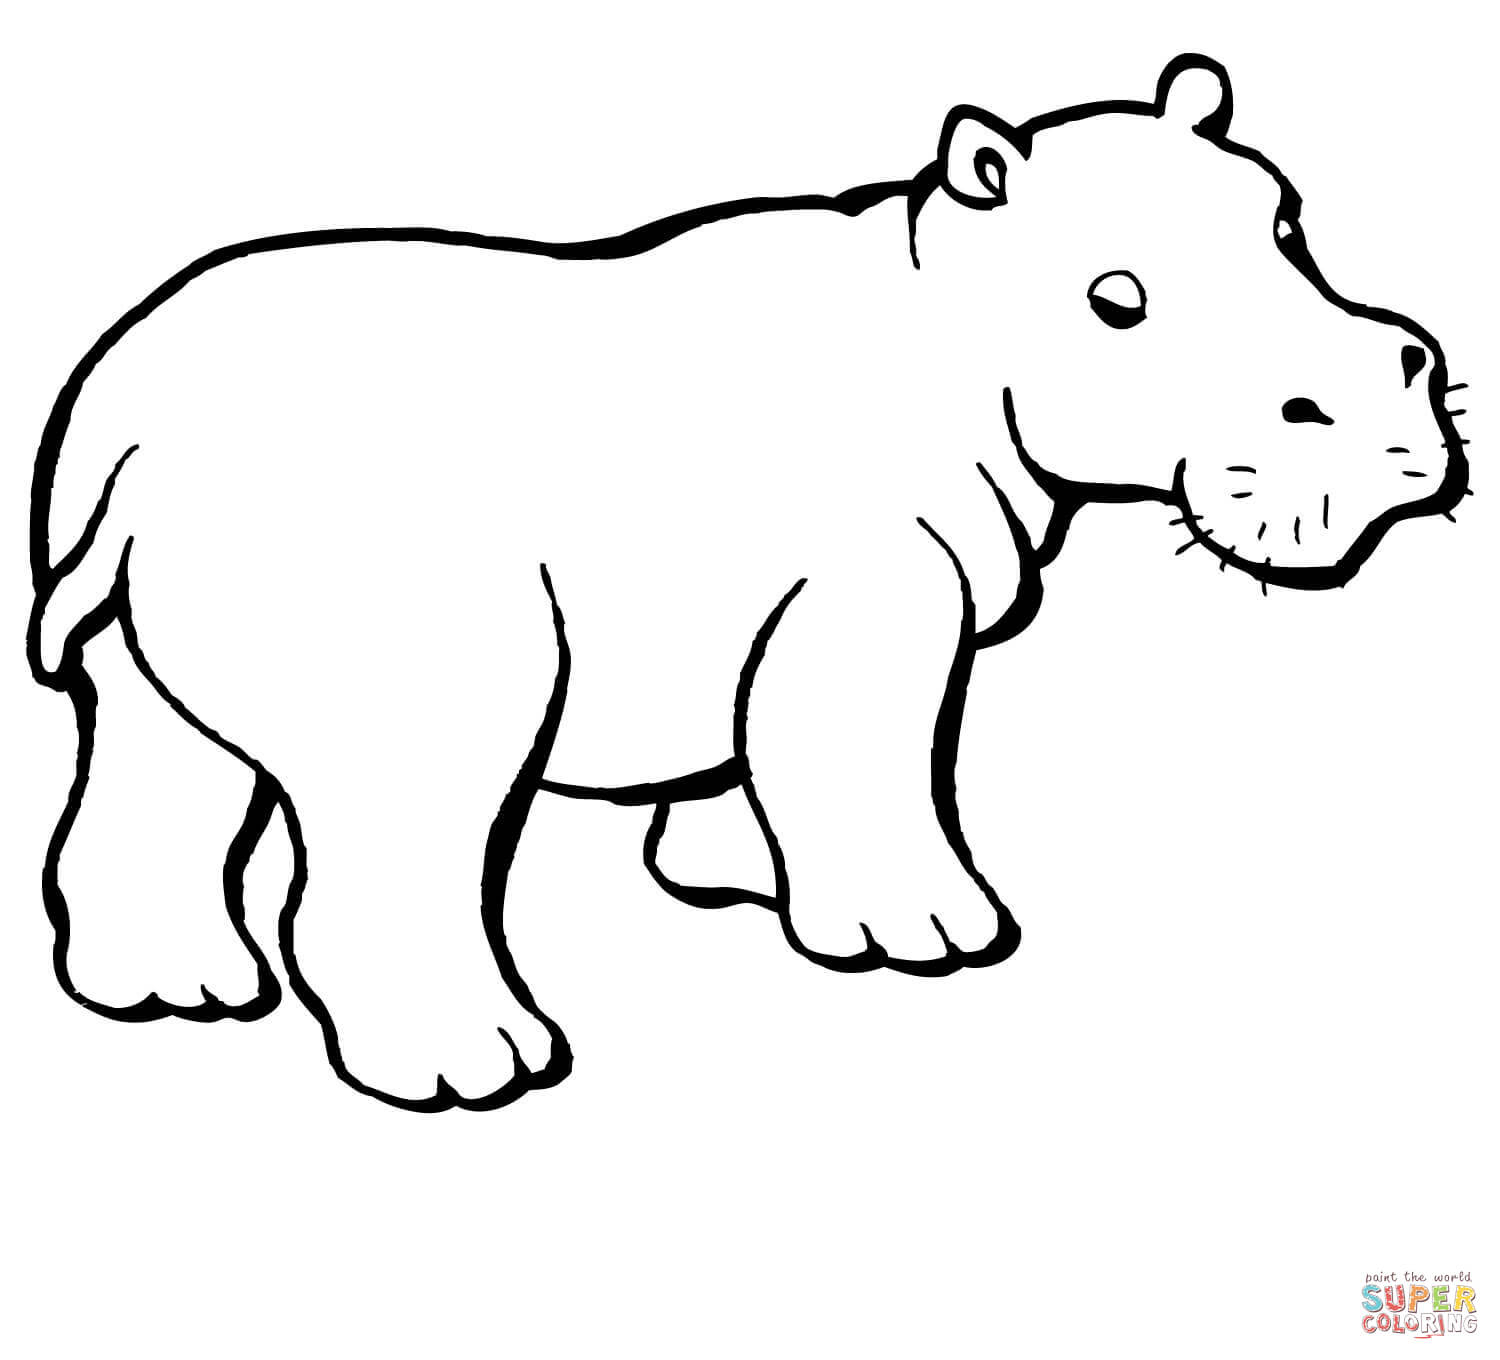 Hippopotamus Coloring Pages | Free Coloring Pages - Free Printable Hippo Coloring Pages